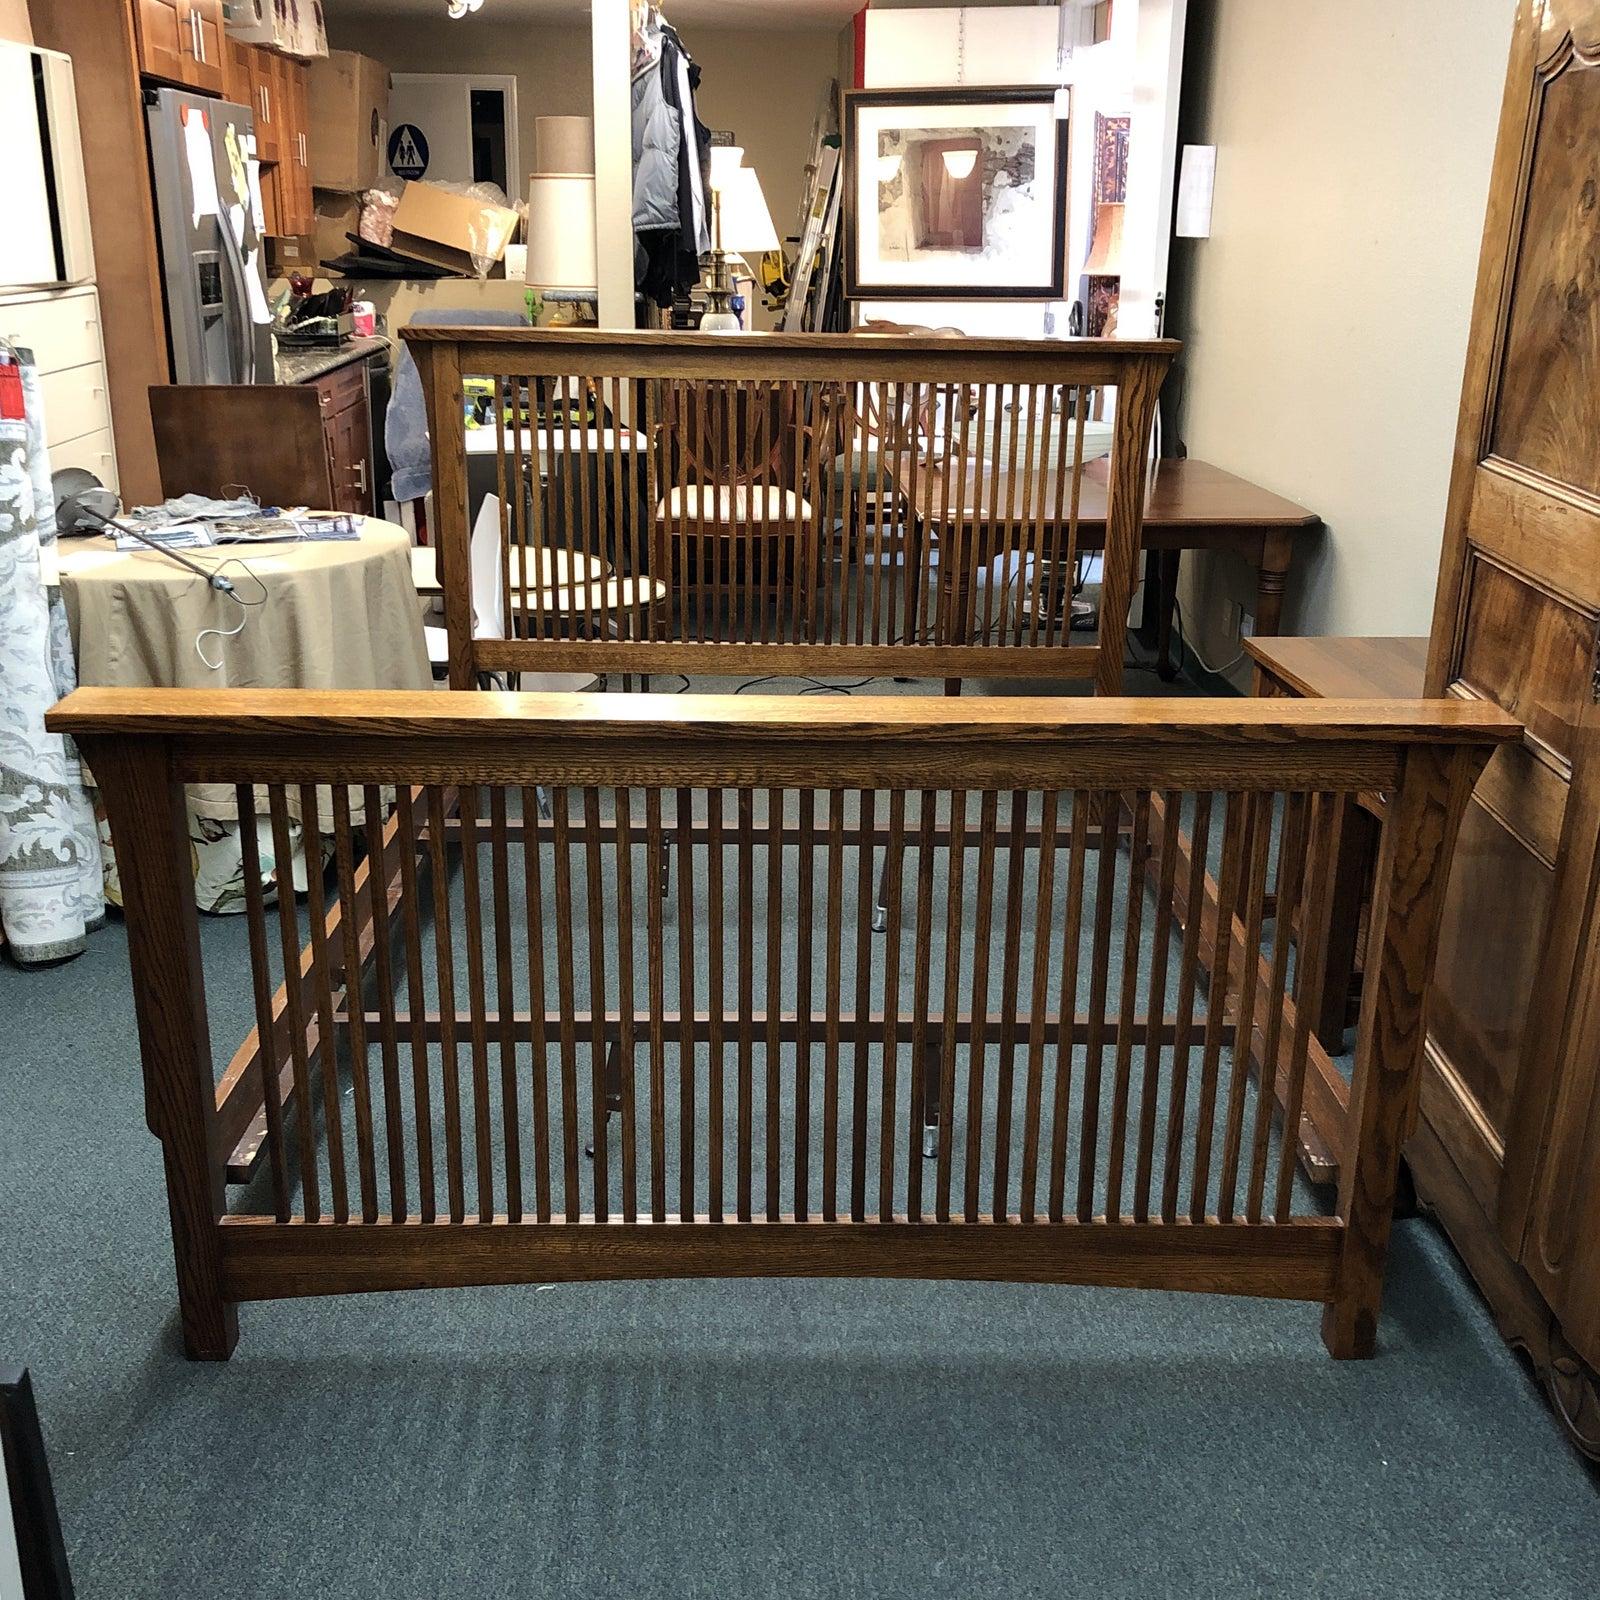 A Queen Mission bed by Michael's Furniture. Known for its quality construction, the large oak piece features dovetailed joinery, solid oak and beautiful Arts & Crafts style.

Matching five drawer dresser, mirror, pair of nightstands and 12 Drawer